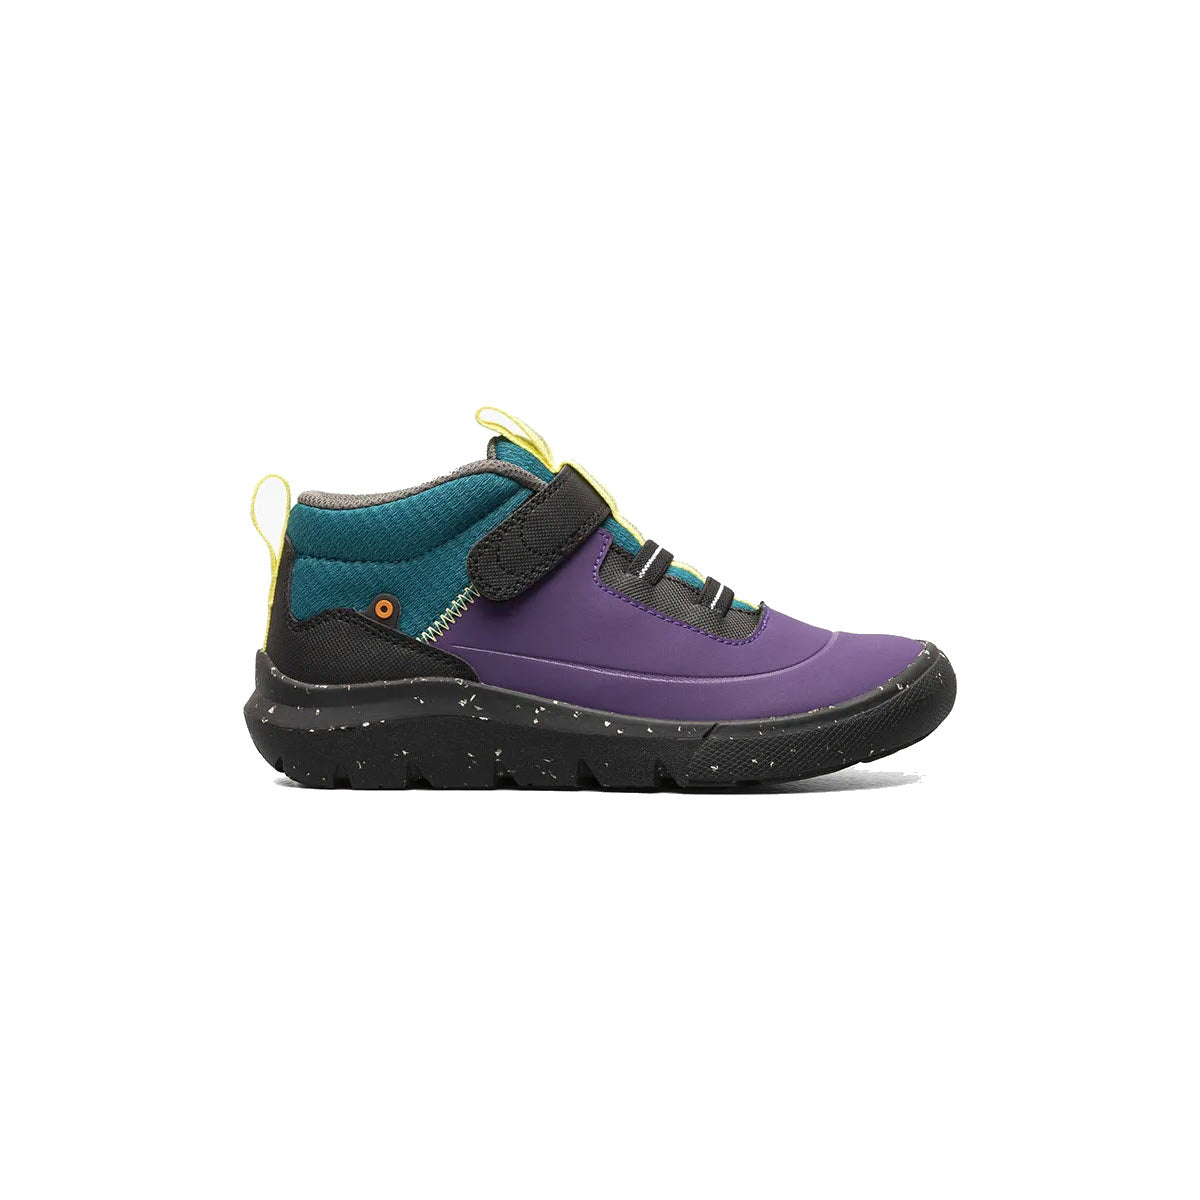 A colorful children's shoe featuring a purple upper, teal ankle padding, and a thick black sole, with a yellow pull tab and a hook and loop closure is the BOGS SKYLINE KICKER MID PURPLE MULTI-K by Bogs.